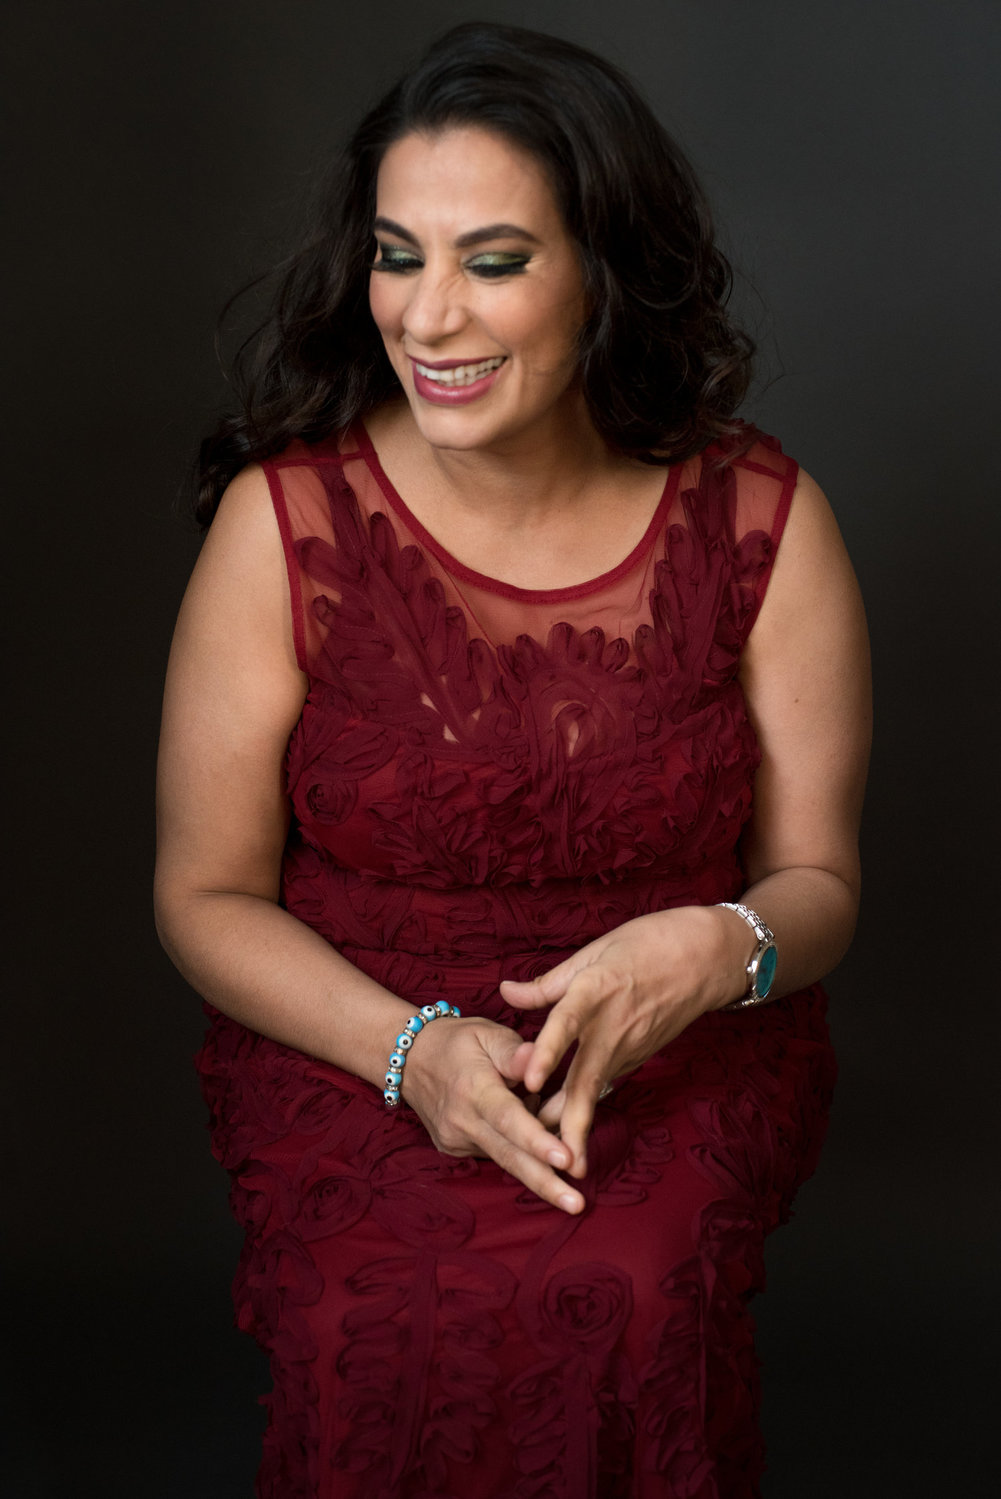 Maysoon Zayid, co-founder/co-executive producer of the New York Arab American Comedy Festival and the Muslim Funny Fest, will perform at "Women STAND UP!" at HPAC Cinema.